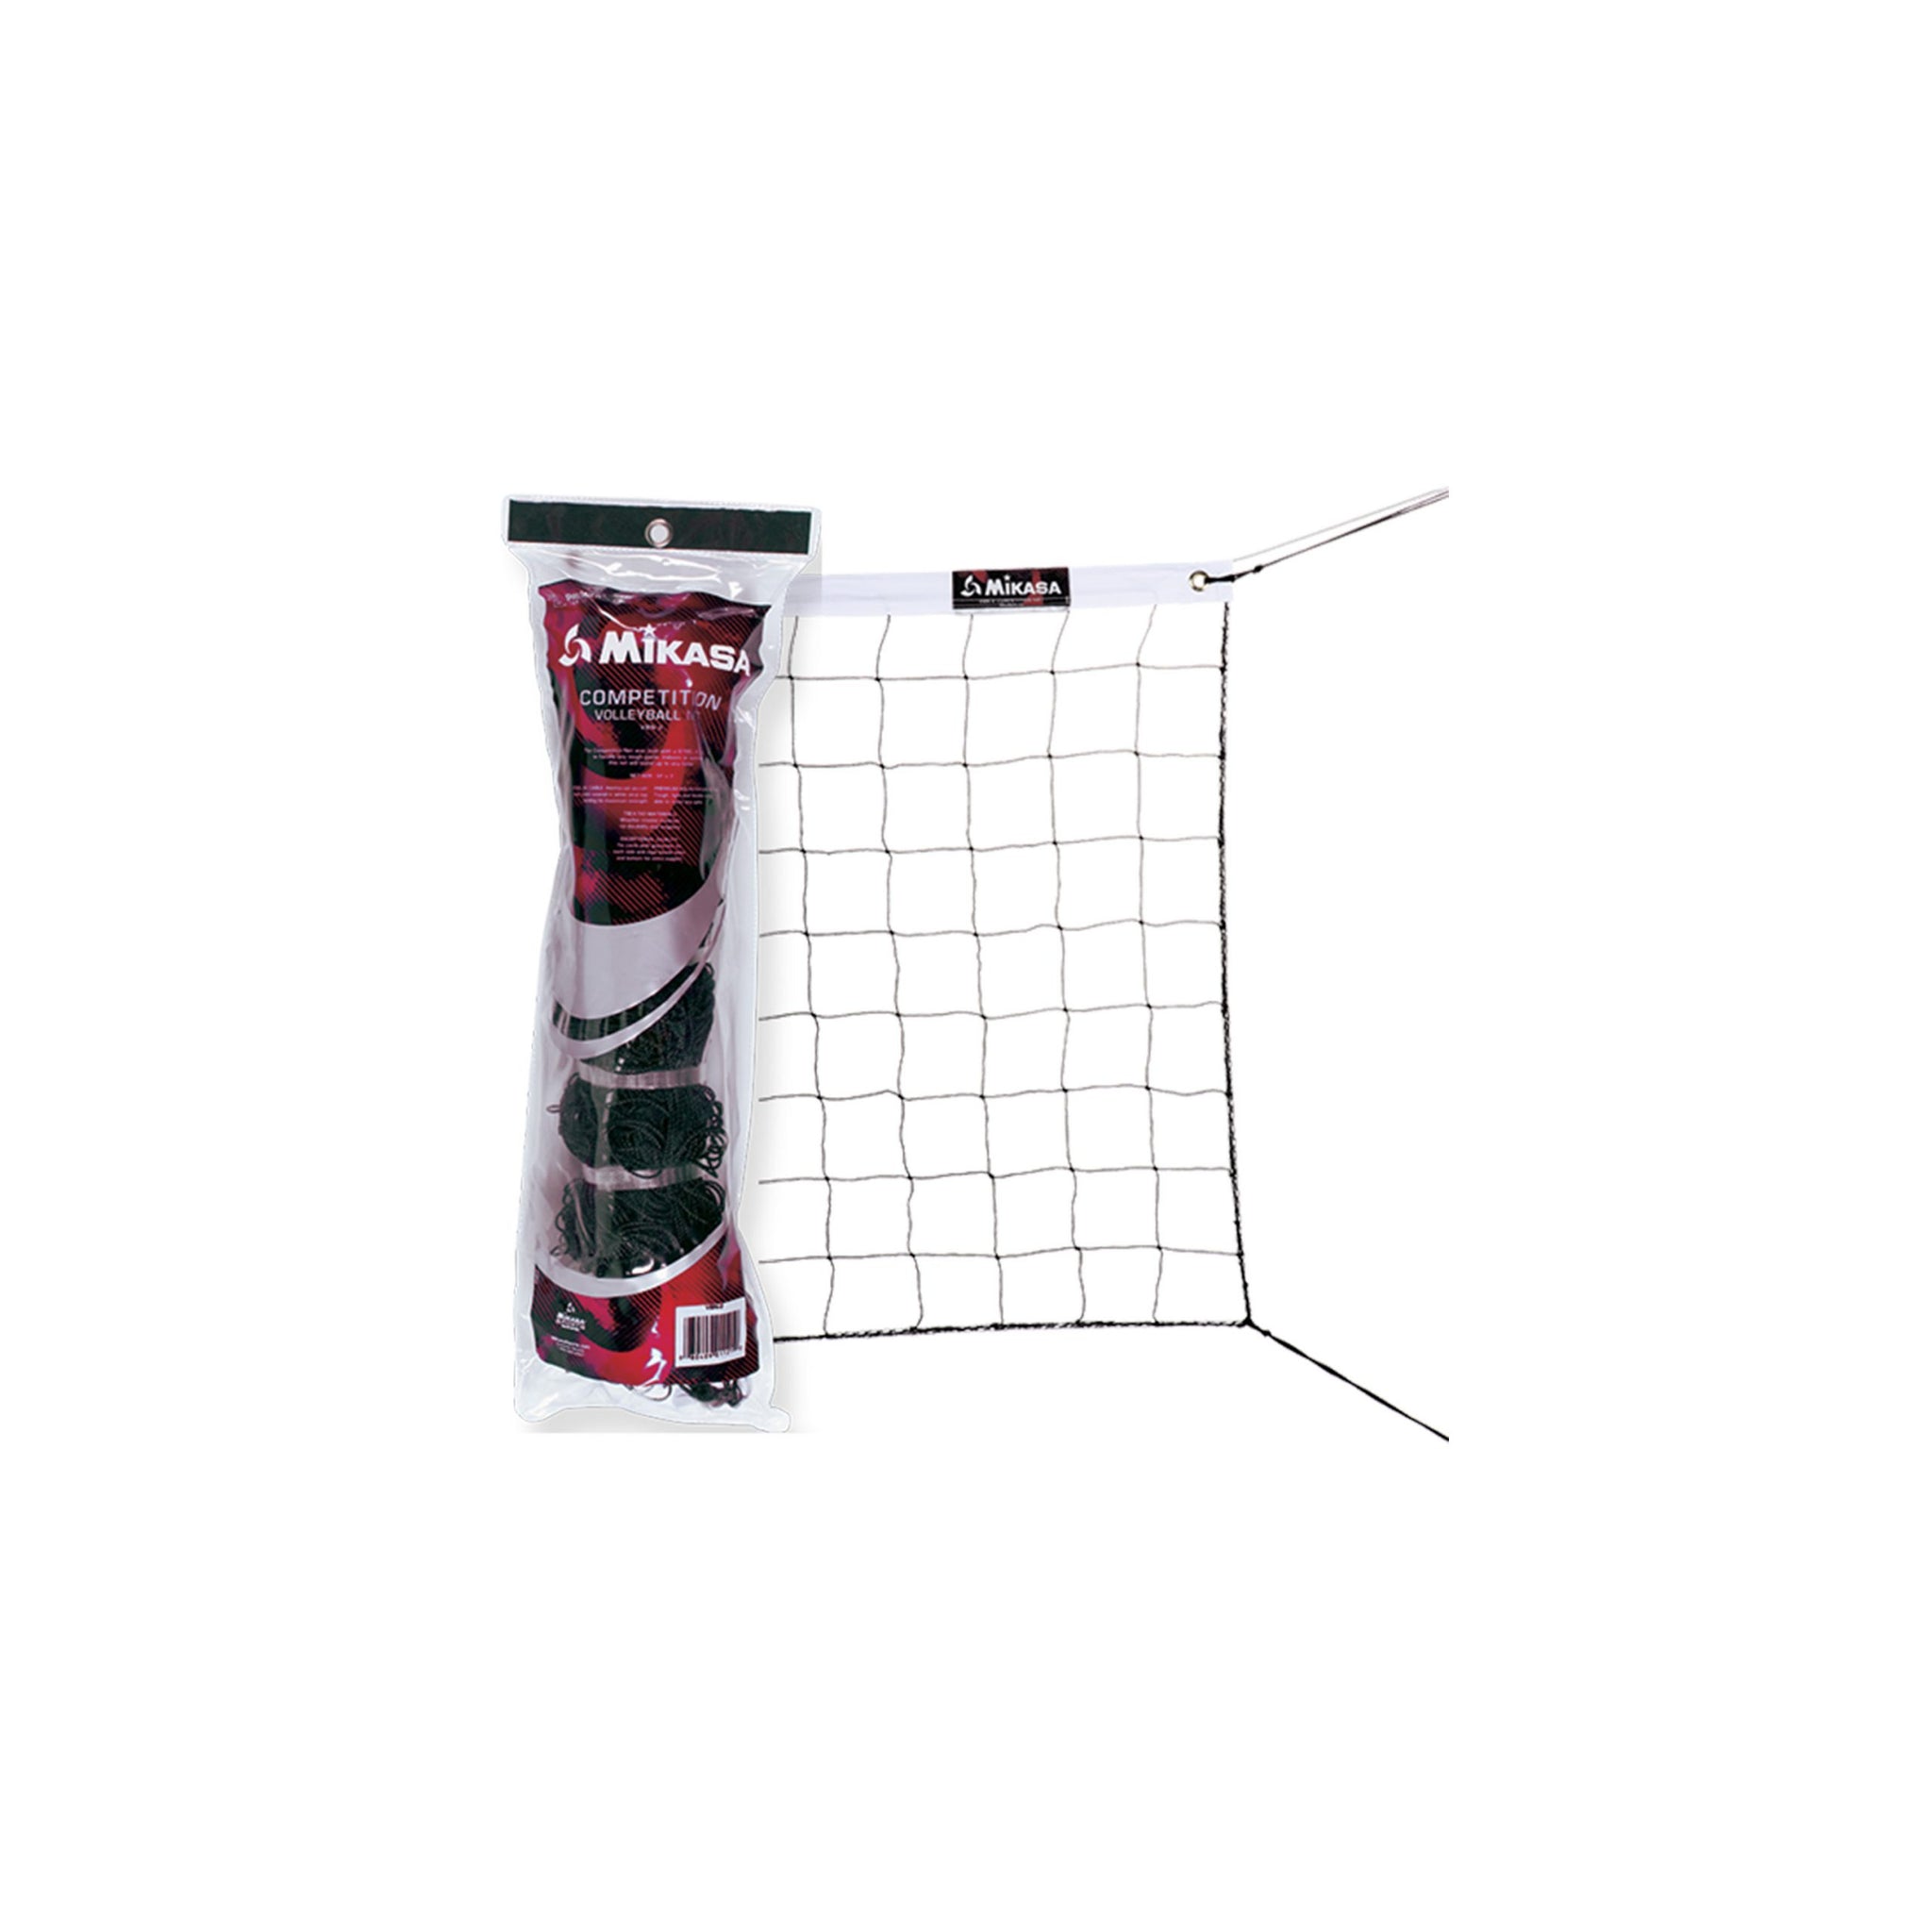 MIKASA VBN-2 Competition Volleyball Net